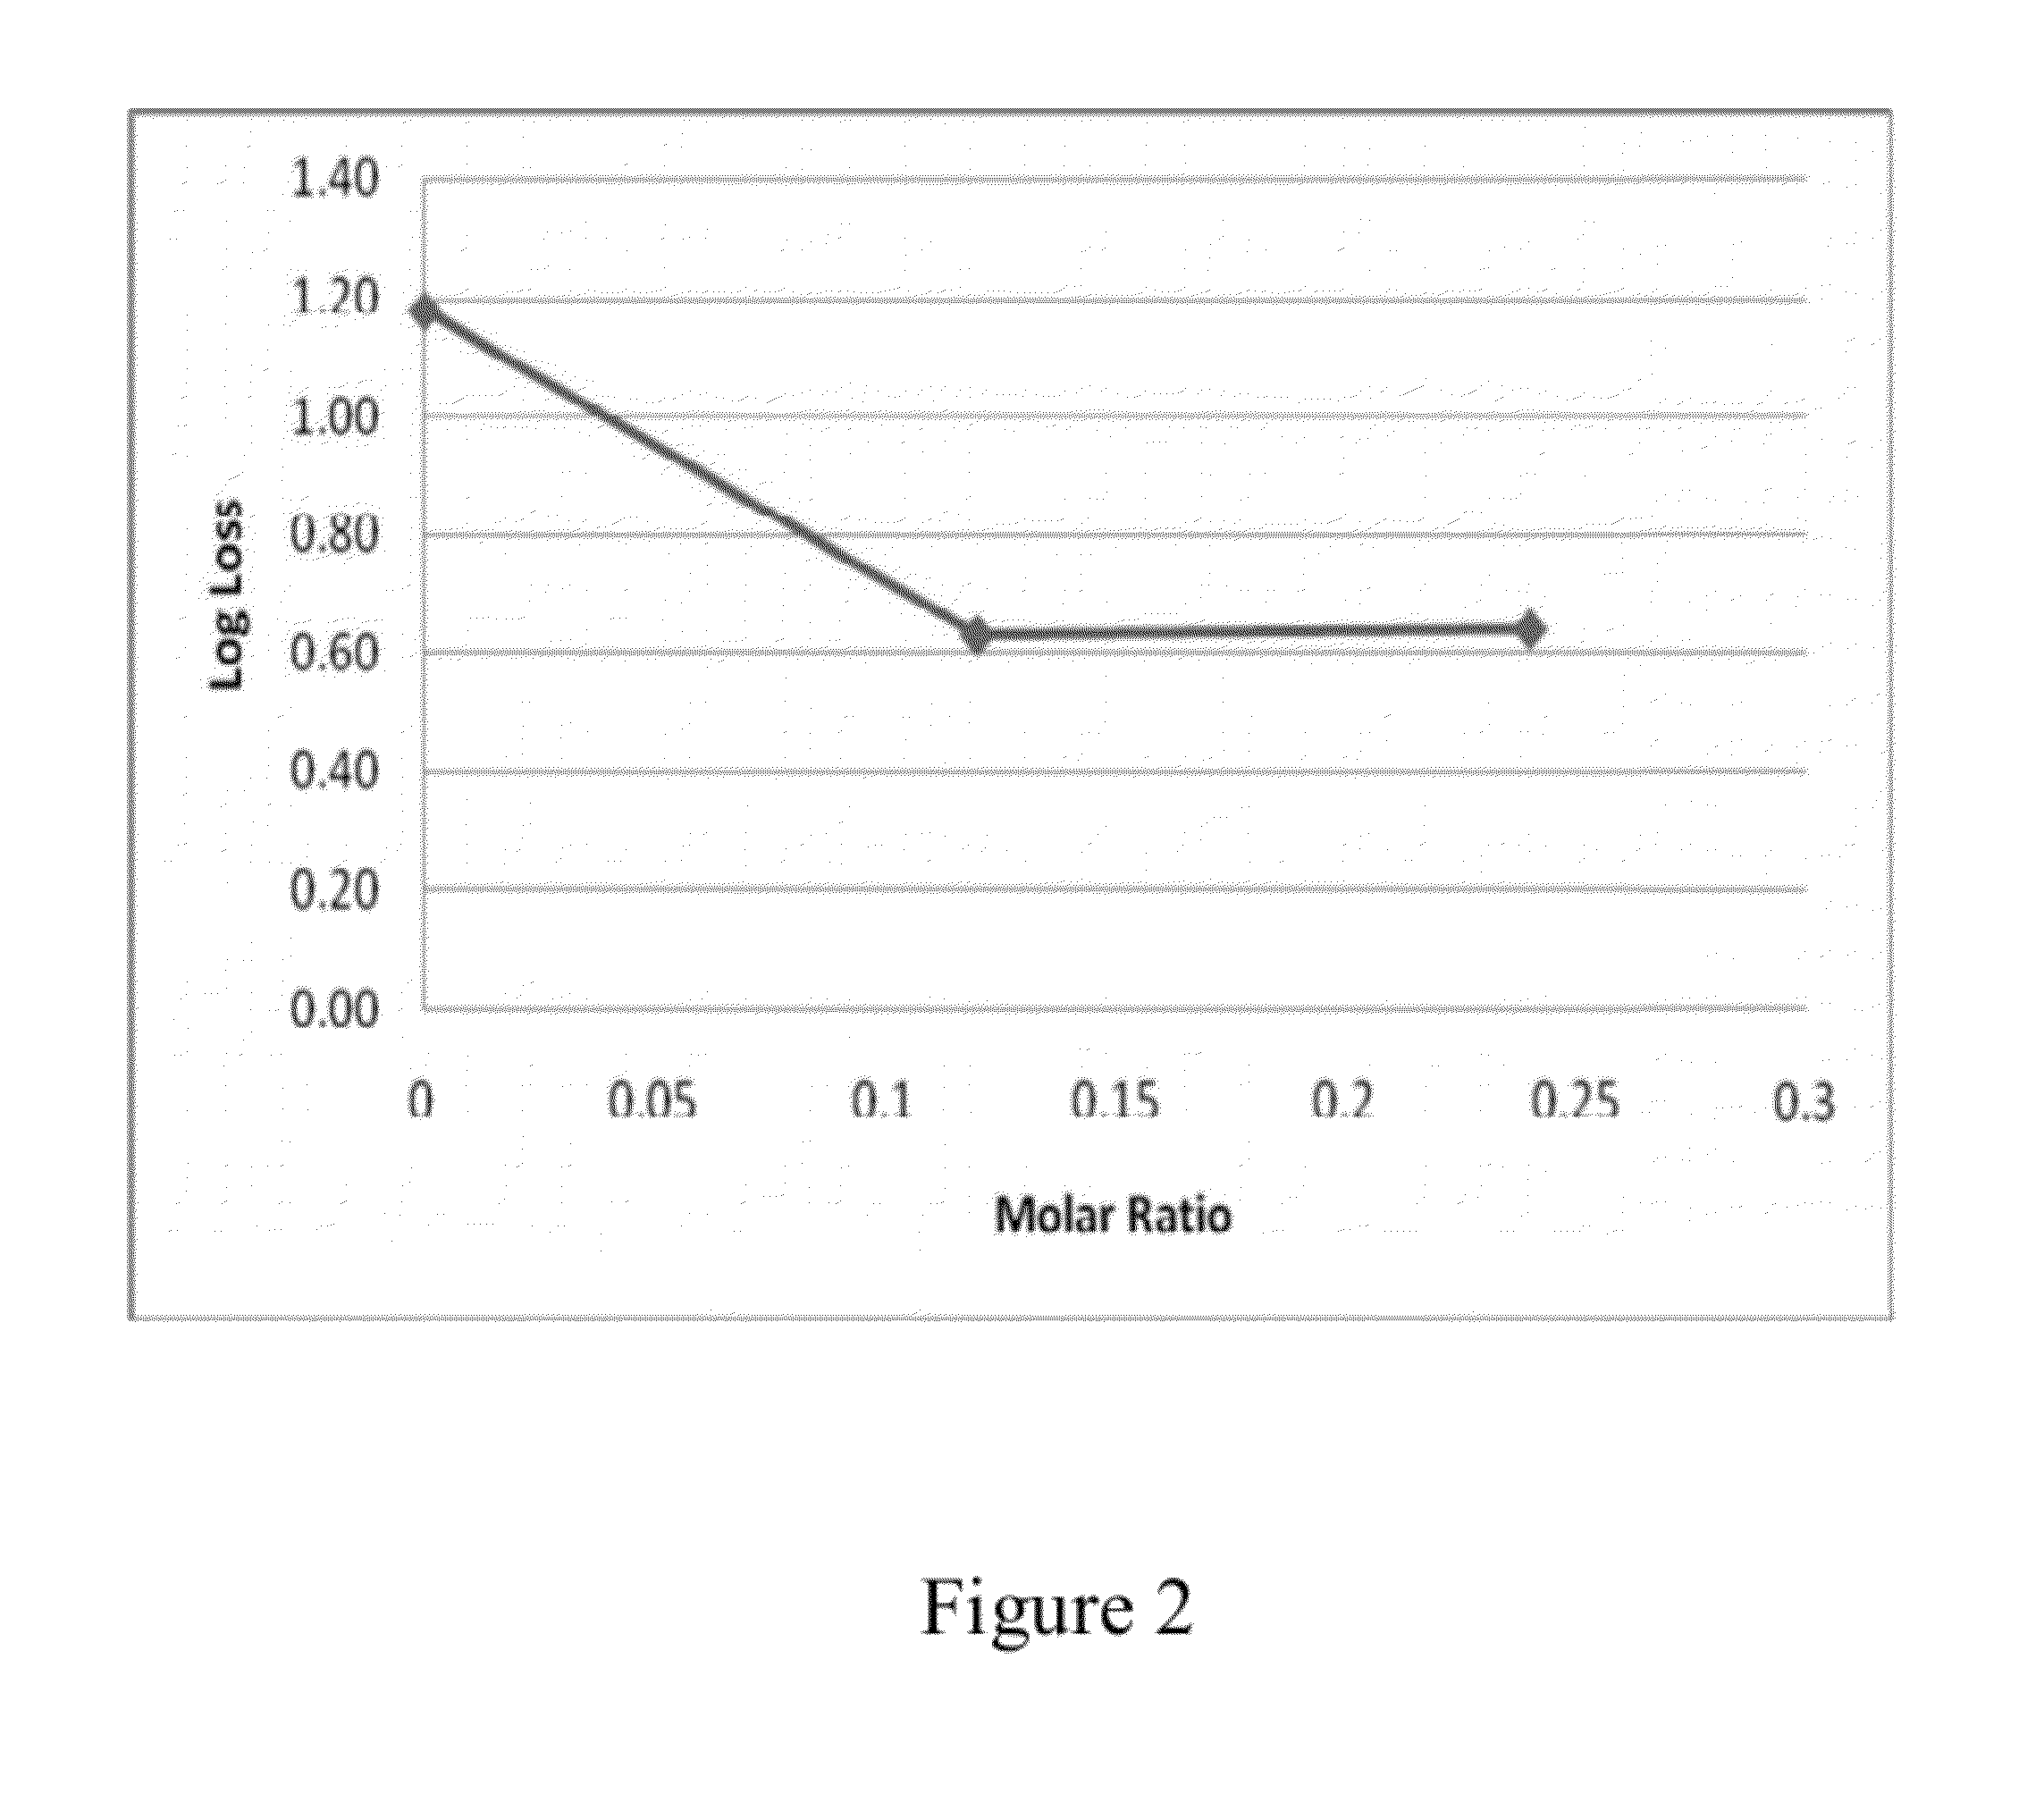 Dry storage stabilizing composition for biological materials